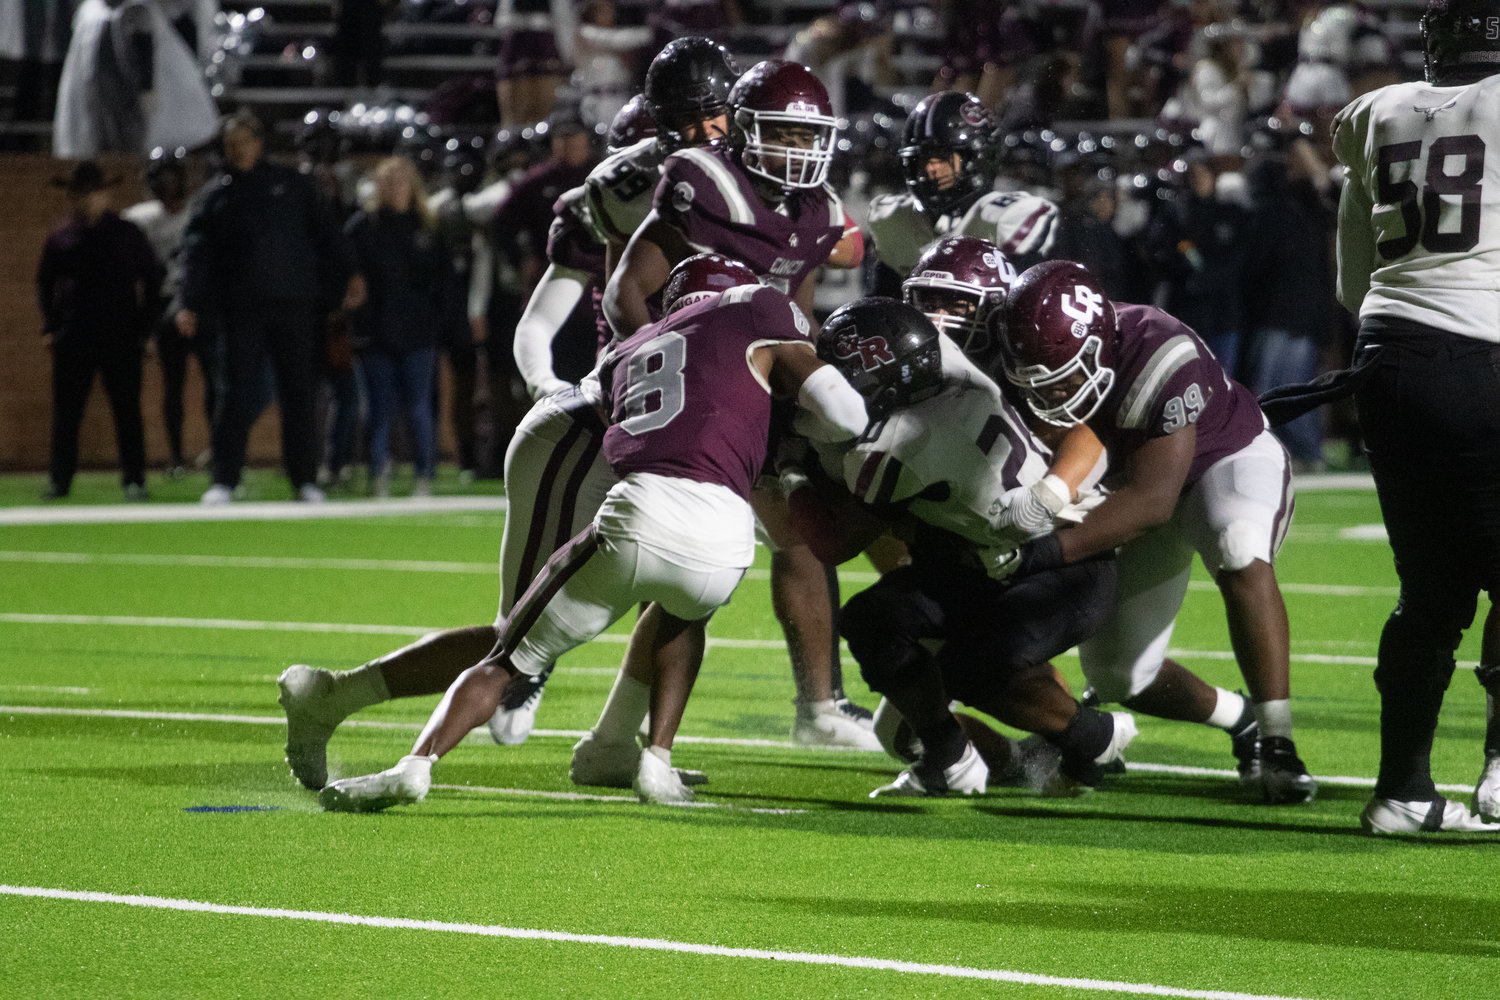 The Cinco Ranch defense makes a stop on a George Ranch ballcarrier during Friday's game between Cinco Ranch and George Ranch at Rhodes Stadium.